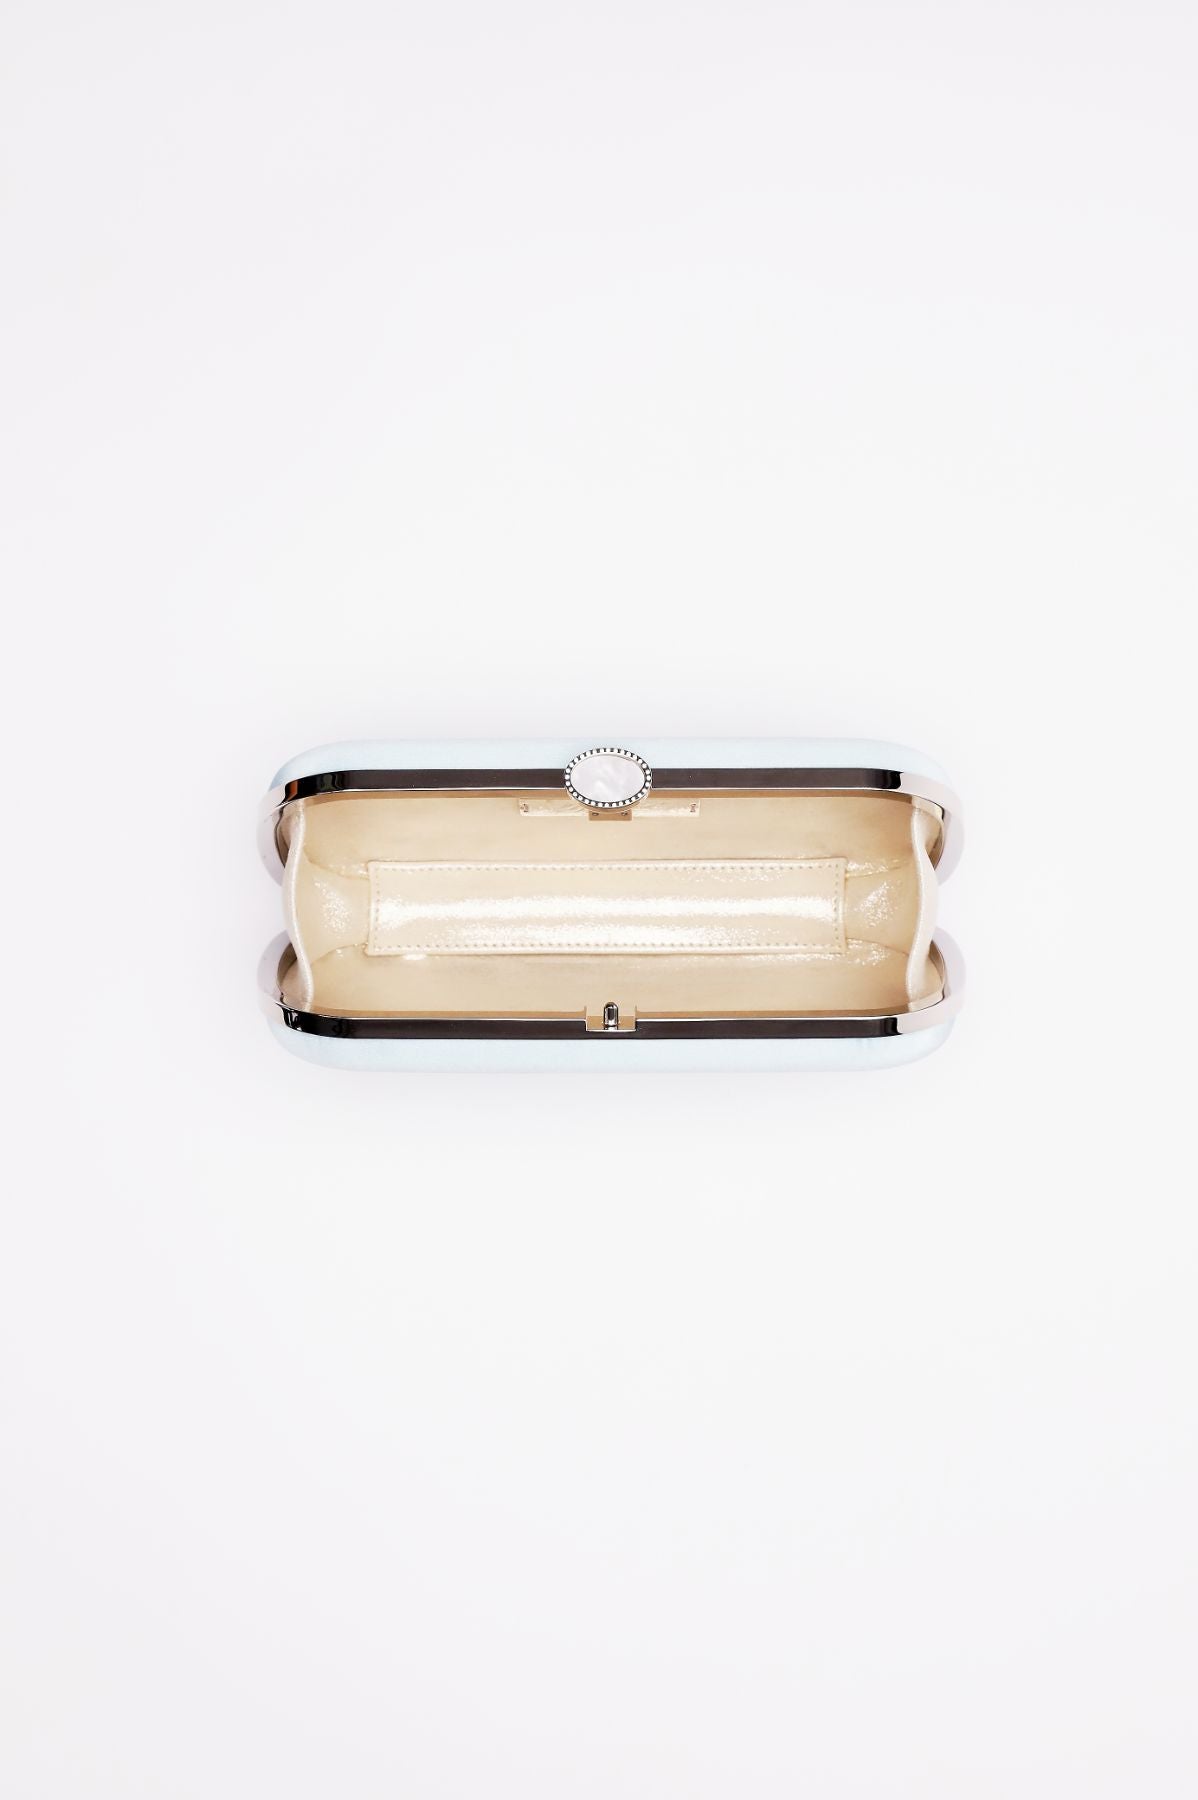 An overhead view of an open cream-colored rectangular Mini Cinderella Blue Bella Clutch on a white background. 
is replaced with:
An overhead view of an open cream-colored rectangular Bella Clutch Cinderella Blue Petite from The Bella Rosa Collection on a white background.